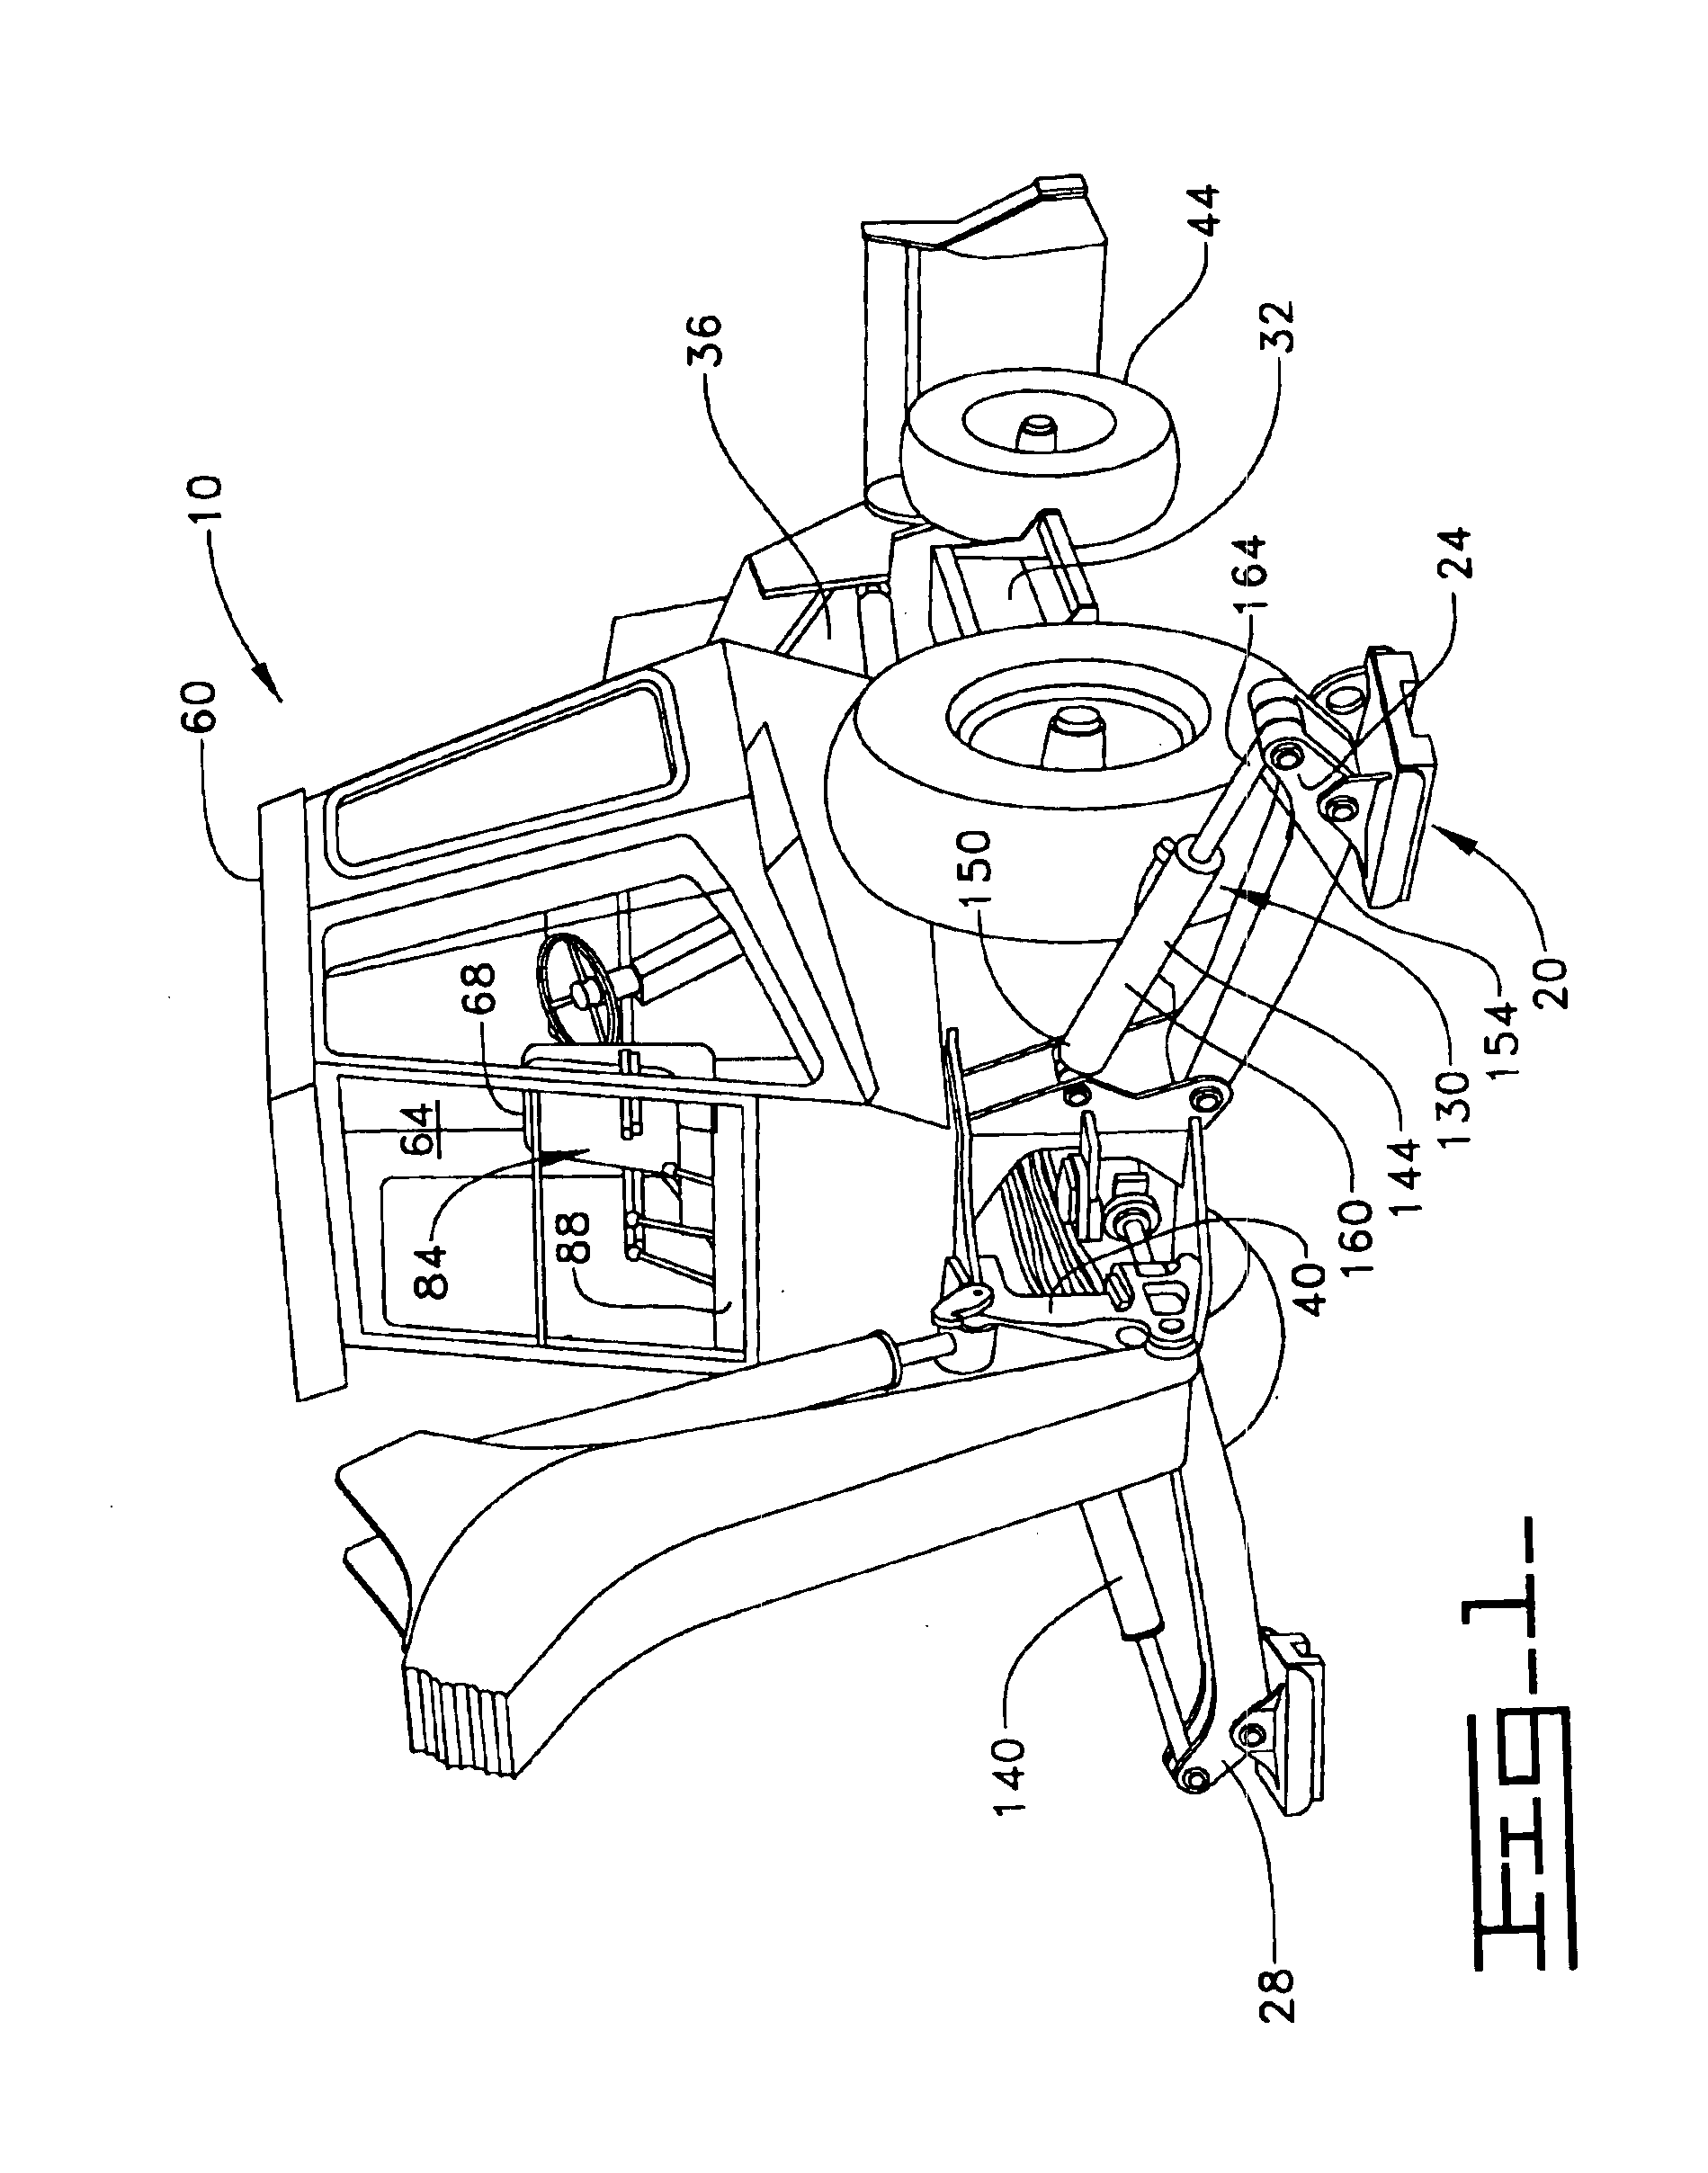 Pilot hydraulic control for a pair of stabilizer legs on a backhoe loader machine